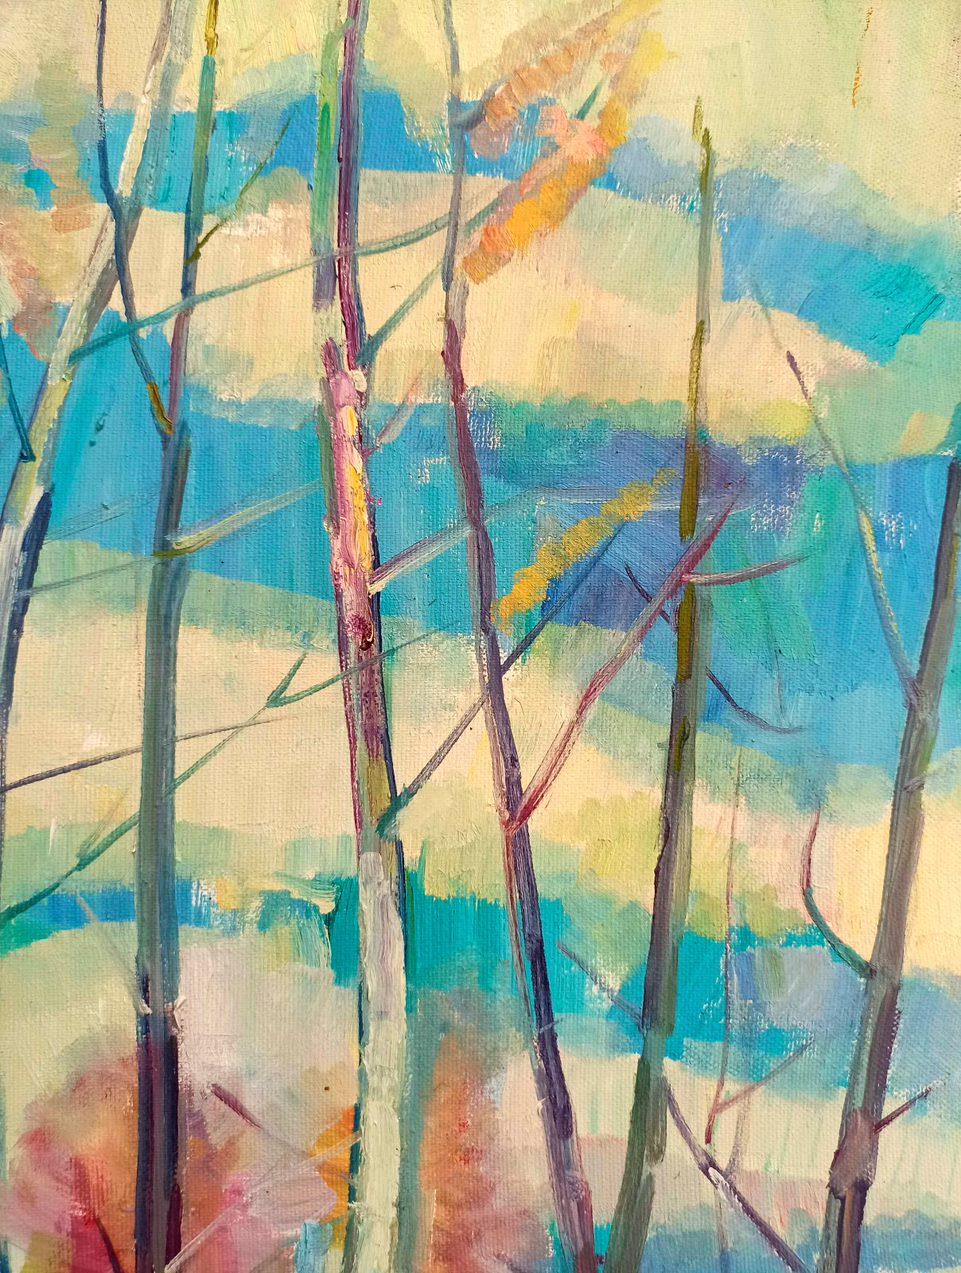 Artist: Peter Tovpev
Work: Original oil painting, handmade artwork, one of a kind 
Medium: Oil on Canvas 
Year: 2023
Style: Post Impressionism
Title: Birches Grove
Size: 31.5